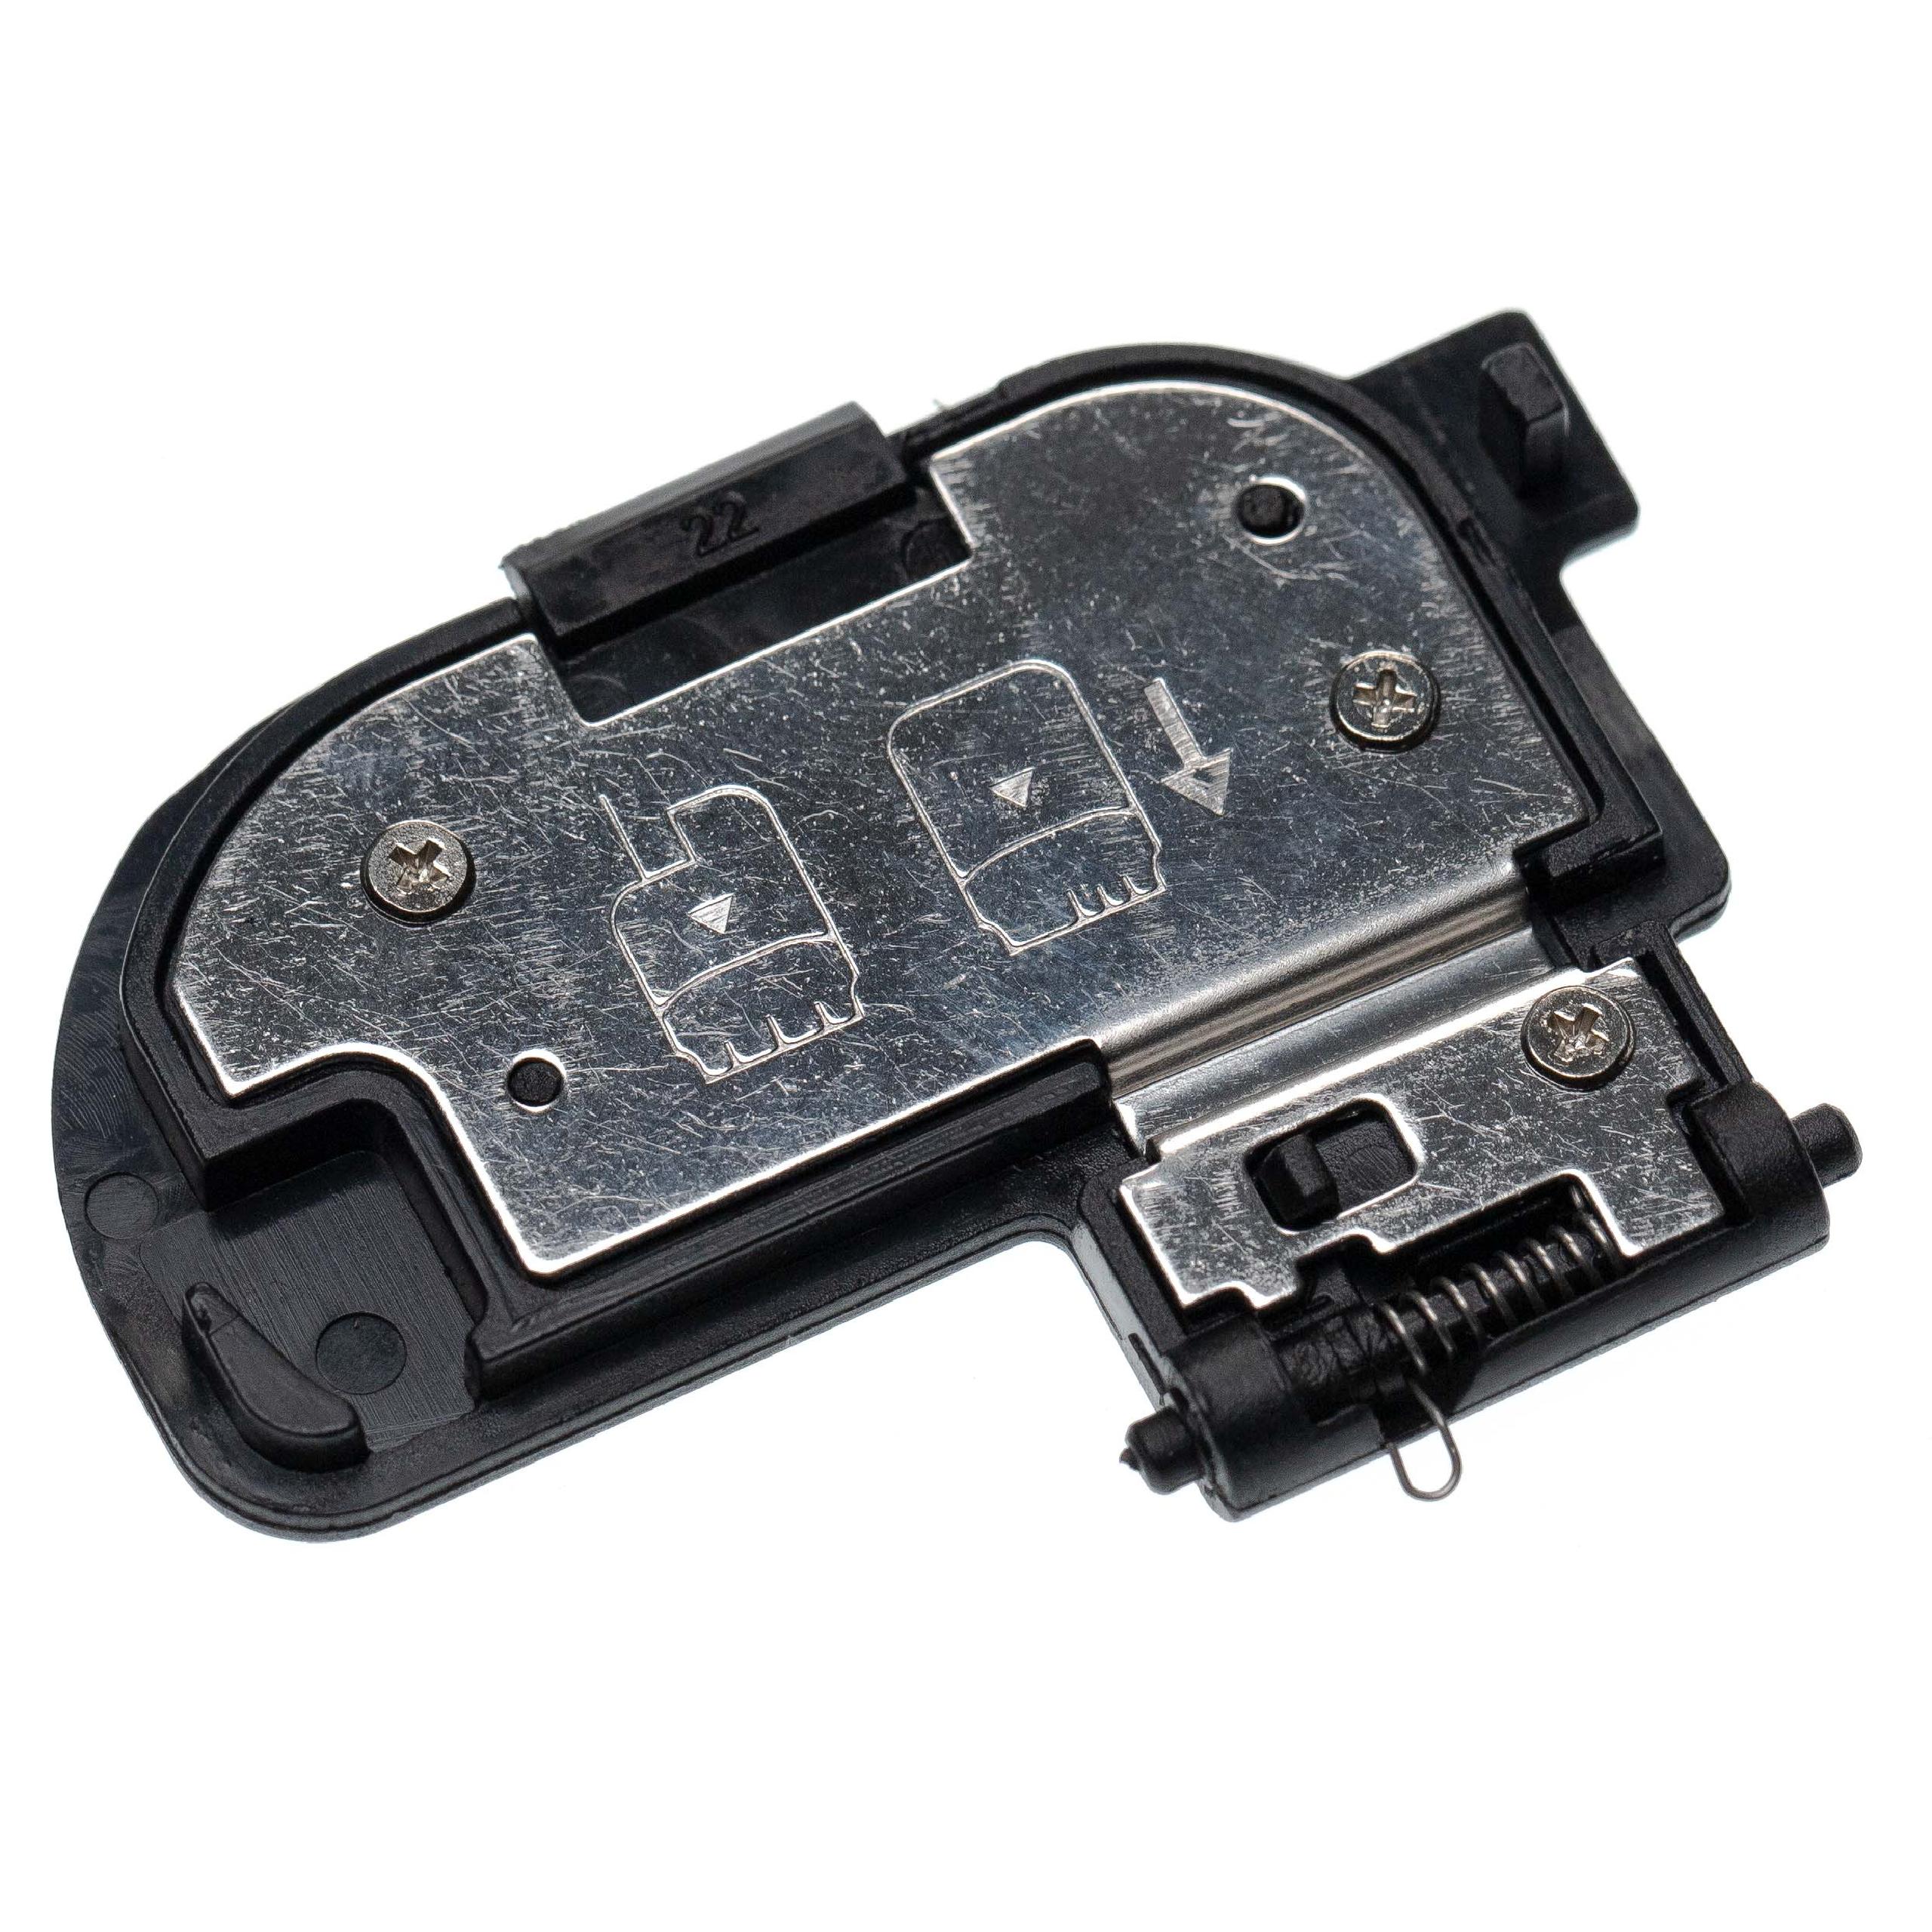 Battery Door Cover suitable for Canon 7D Mark II Camera, Battery Grip